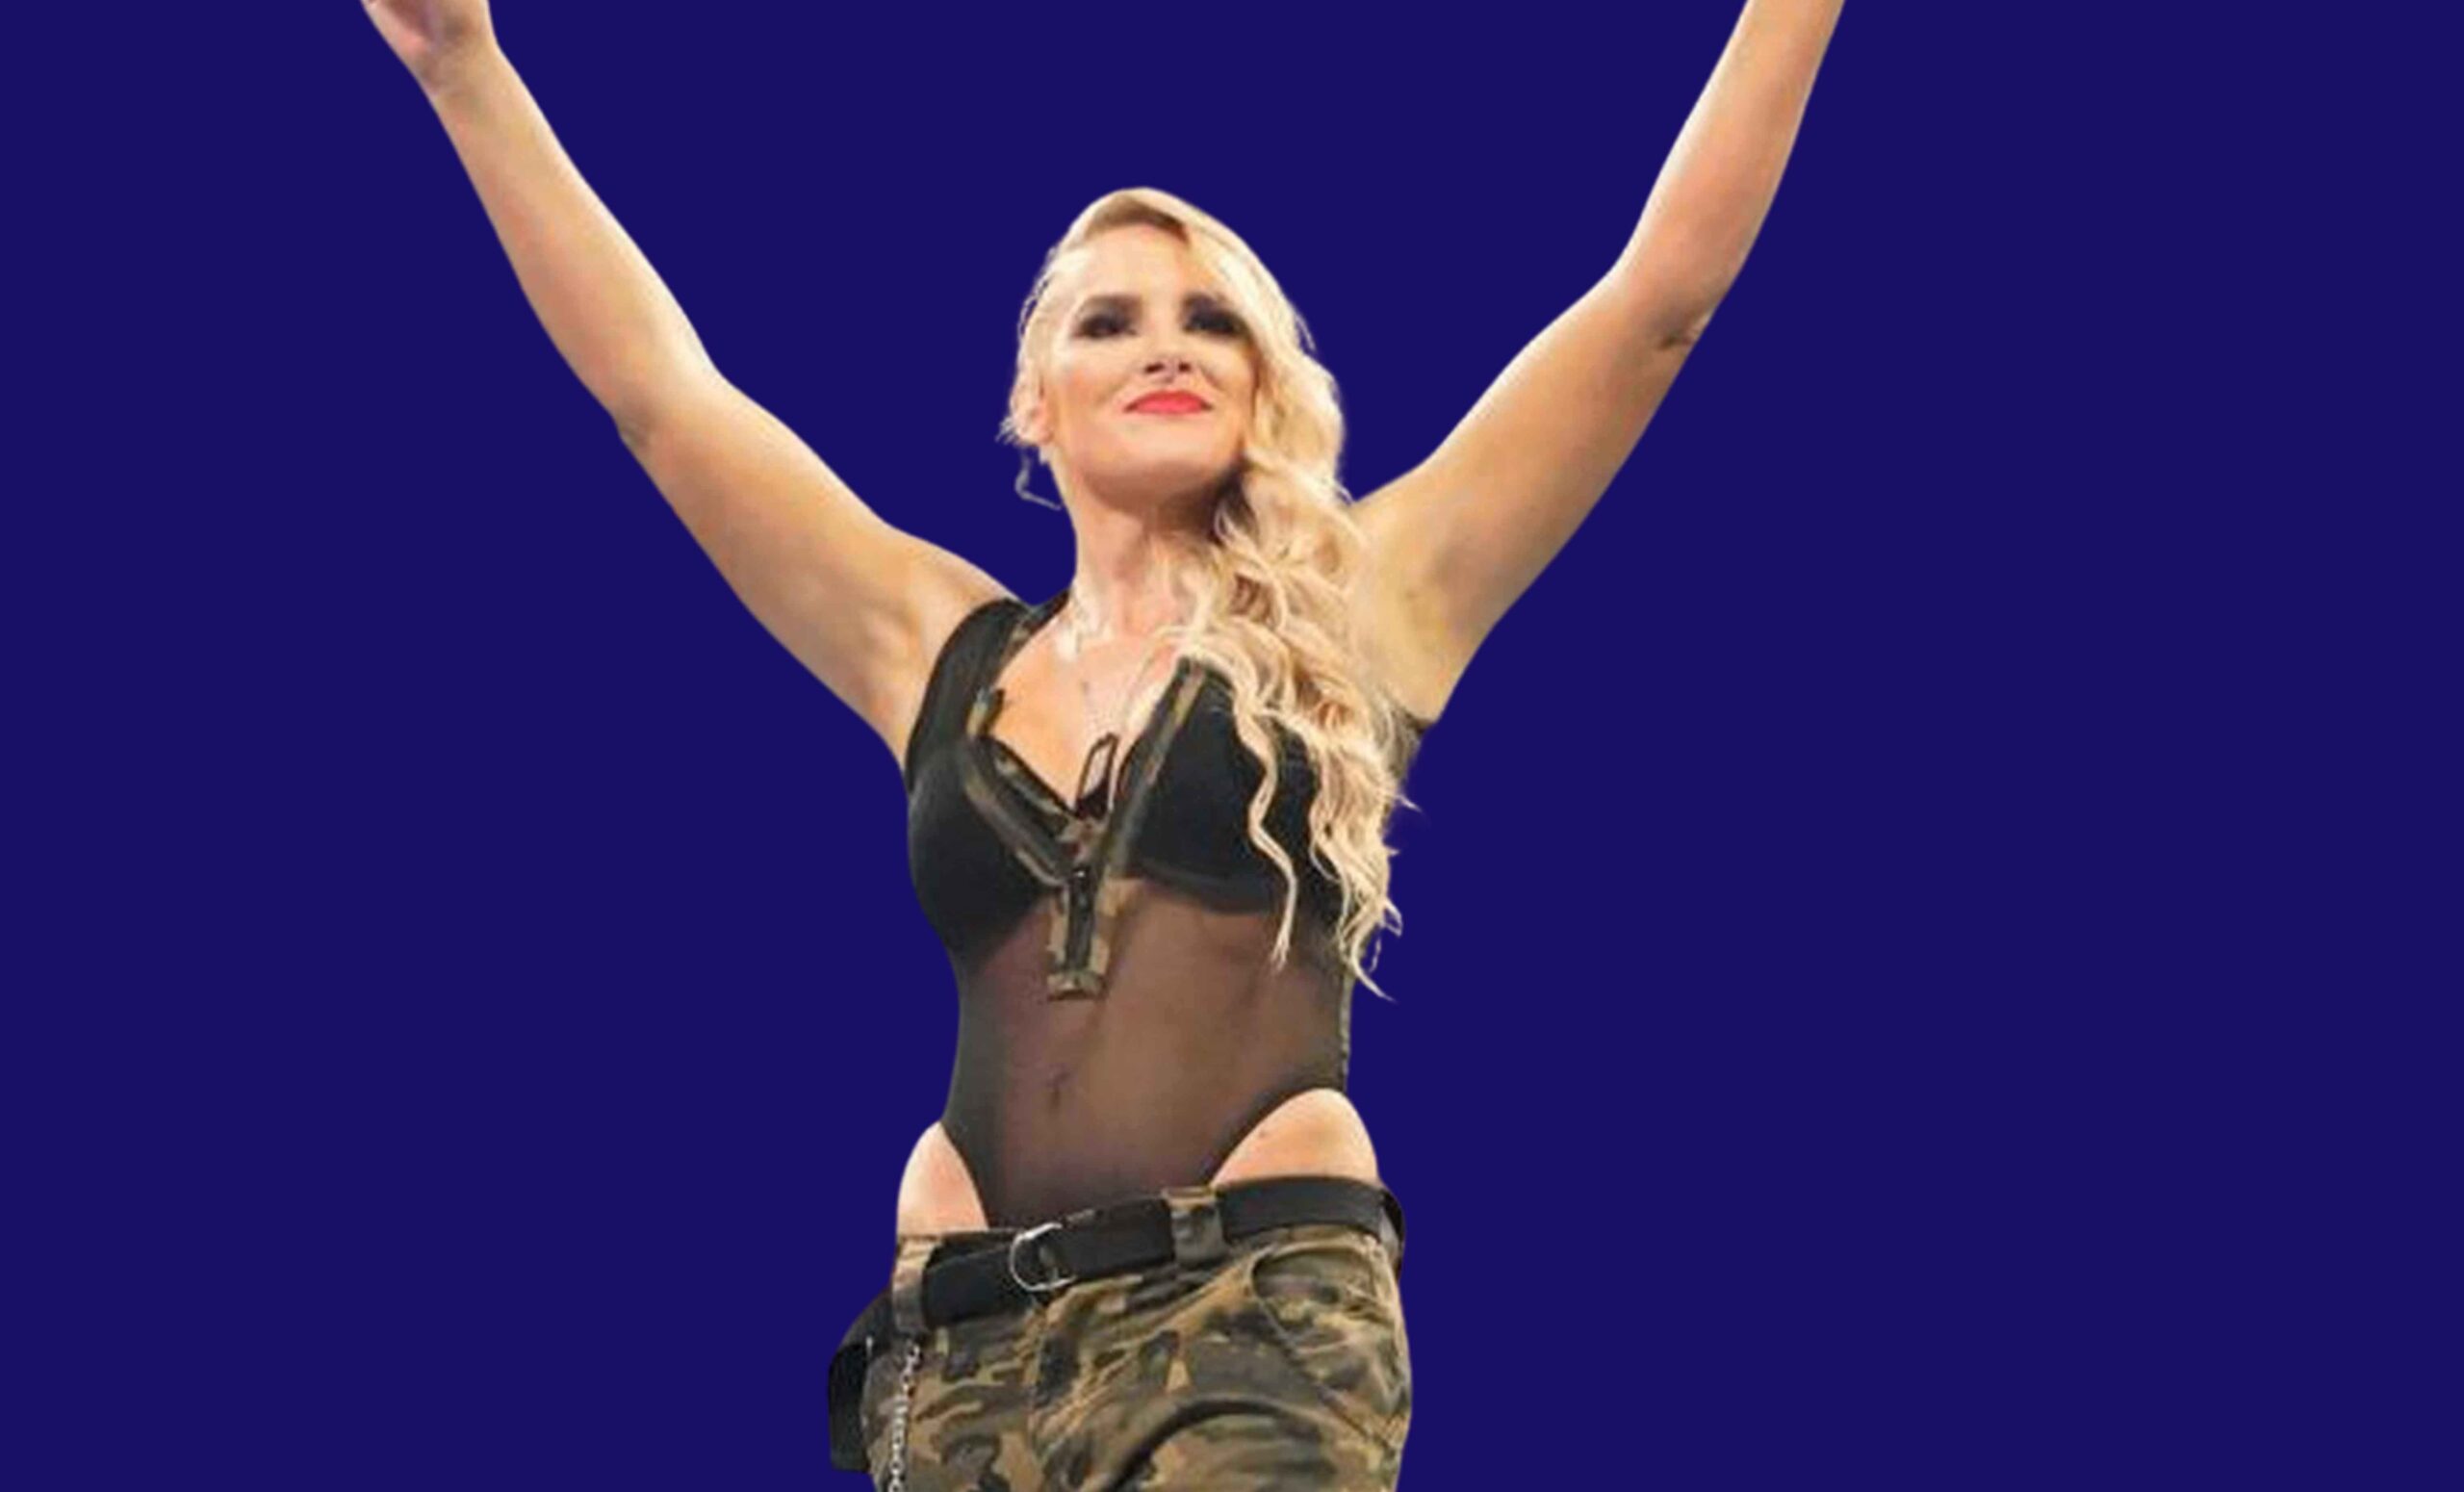 Lacey Evans is one of many WWE Superstars who have fans who want to see her win on television. The new character Lacey Evans debuted on SmackDown last week didn't help her win. In a Money in the Bank qualifying match, Zelina Vega defeated Evans. It seems Lace Evans will remain a heel on the lower end of the totem pole, as Dave Meltzer noted on Wrestling Observer Radio. Evans was abused by Sgt Slaughter's daughter, and then the Lady of WWE fired a shady tweet at her. Lacey Evans wasn't done with Sgt Slaughter's daughter either. She threw another insult her way, but it might not help WWE book her. Lacey Evans' WWE Career Takes a Hit with Disappointing News